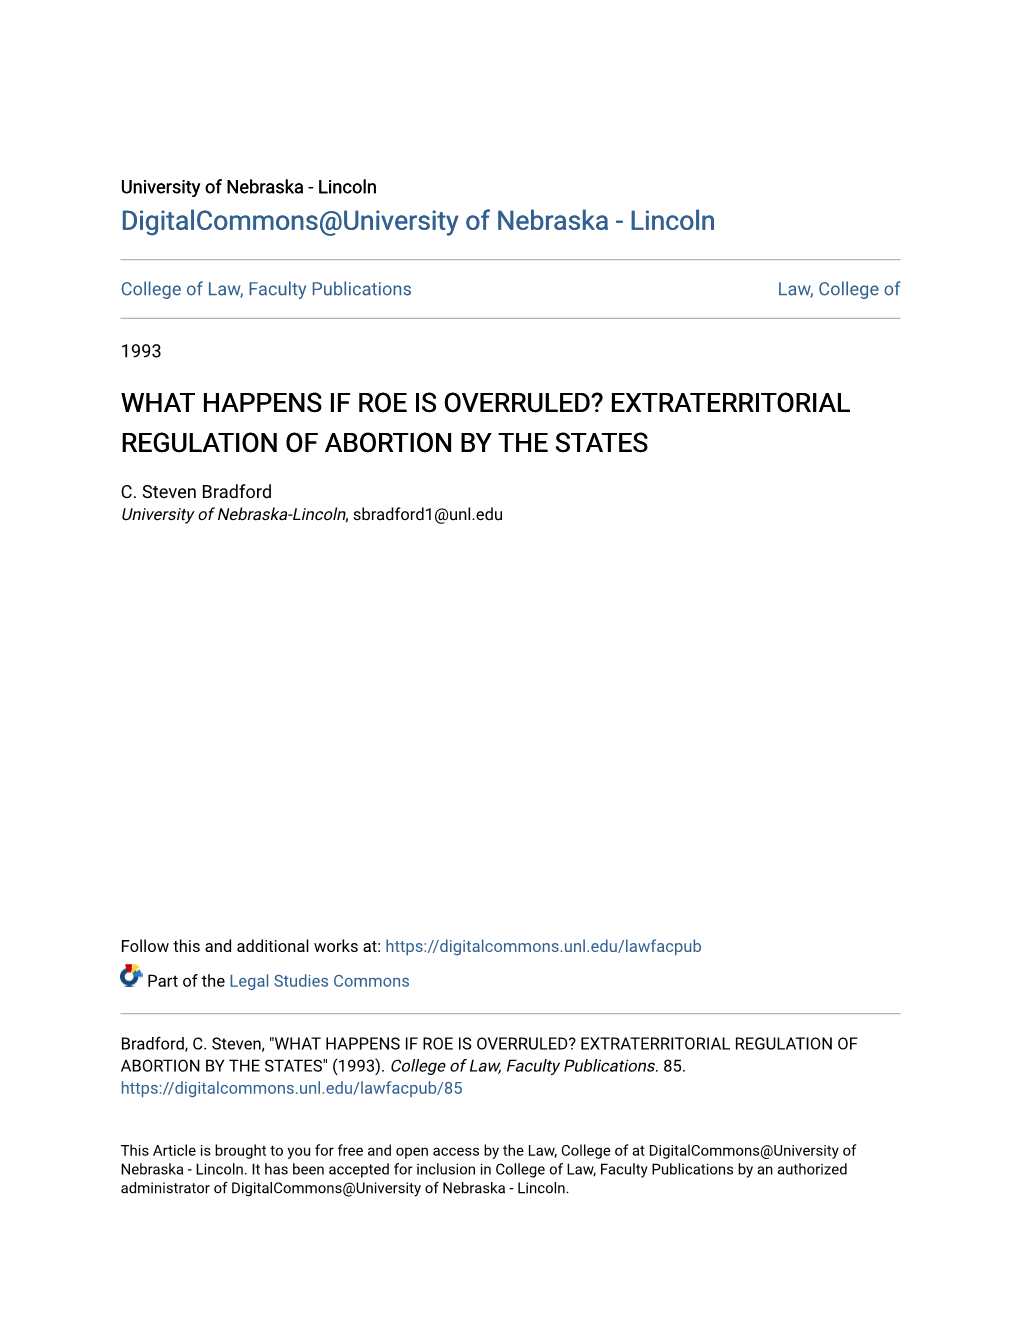 Extraterritorial Regulation of Abortion by the States